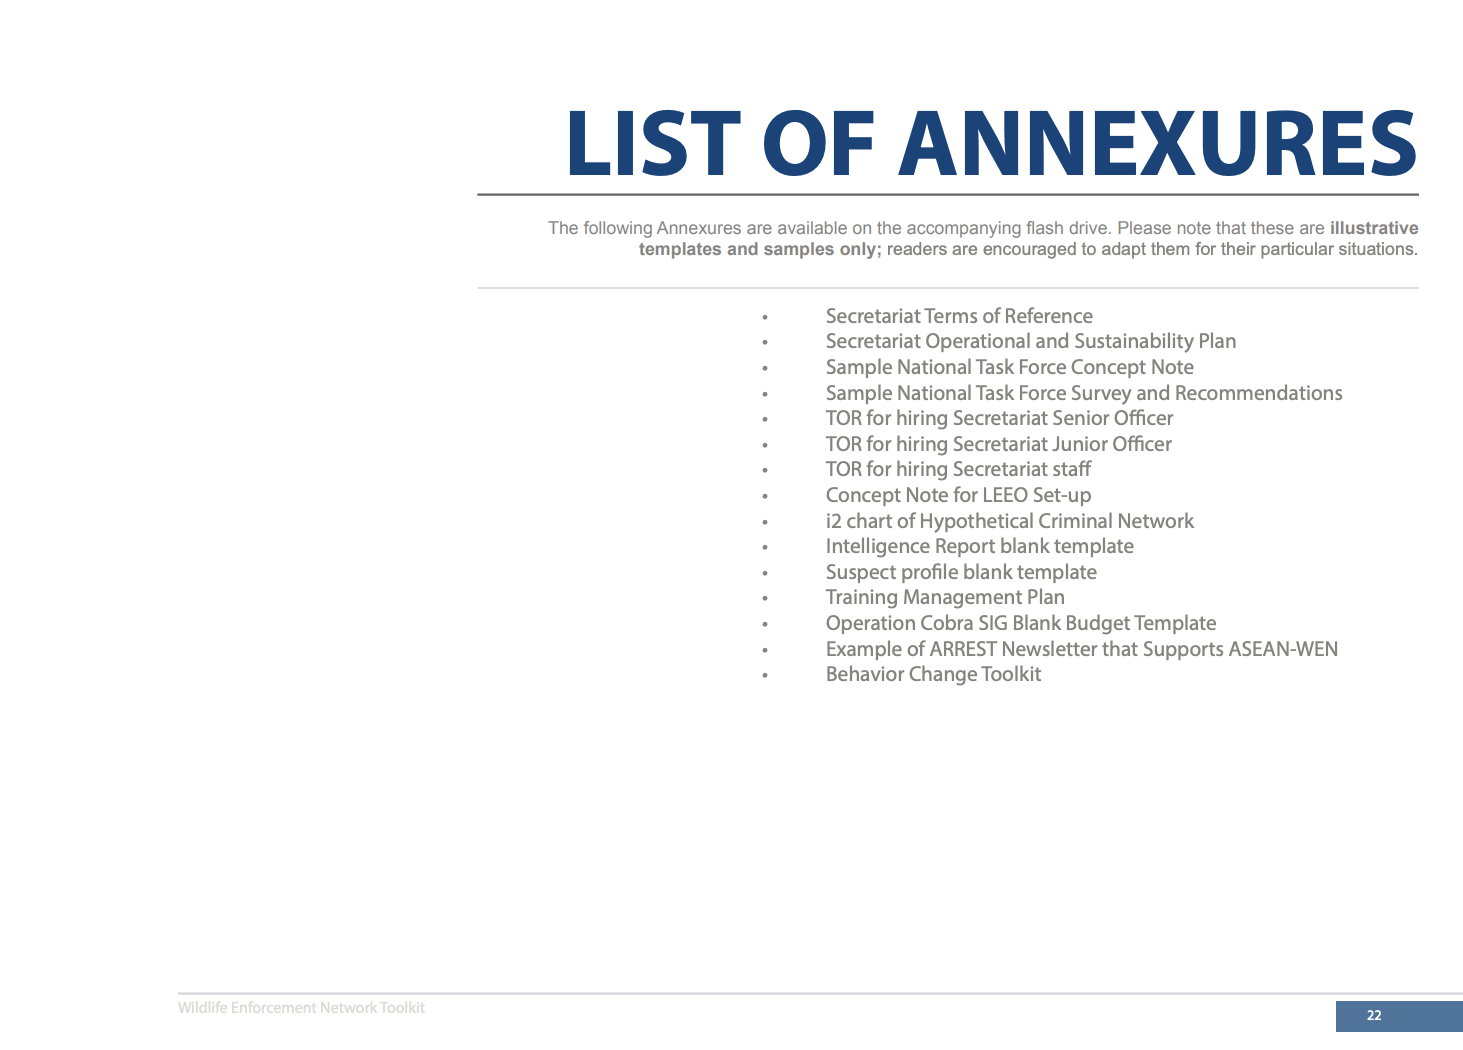 WEN  Toolkit Annex image for download